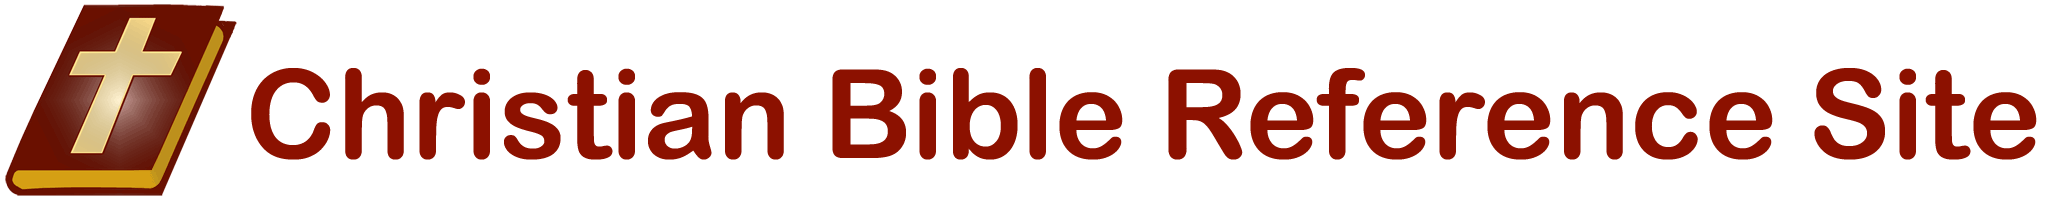 The Christian Bible Reference Site